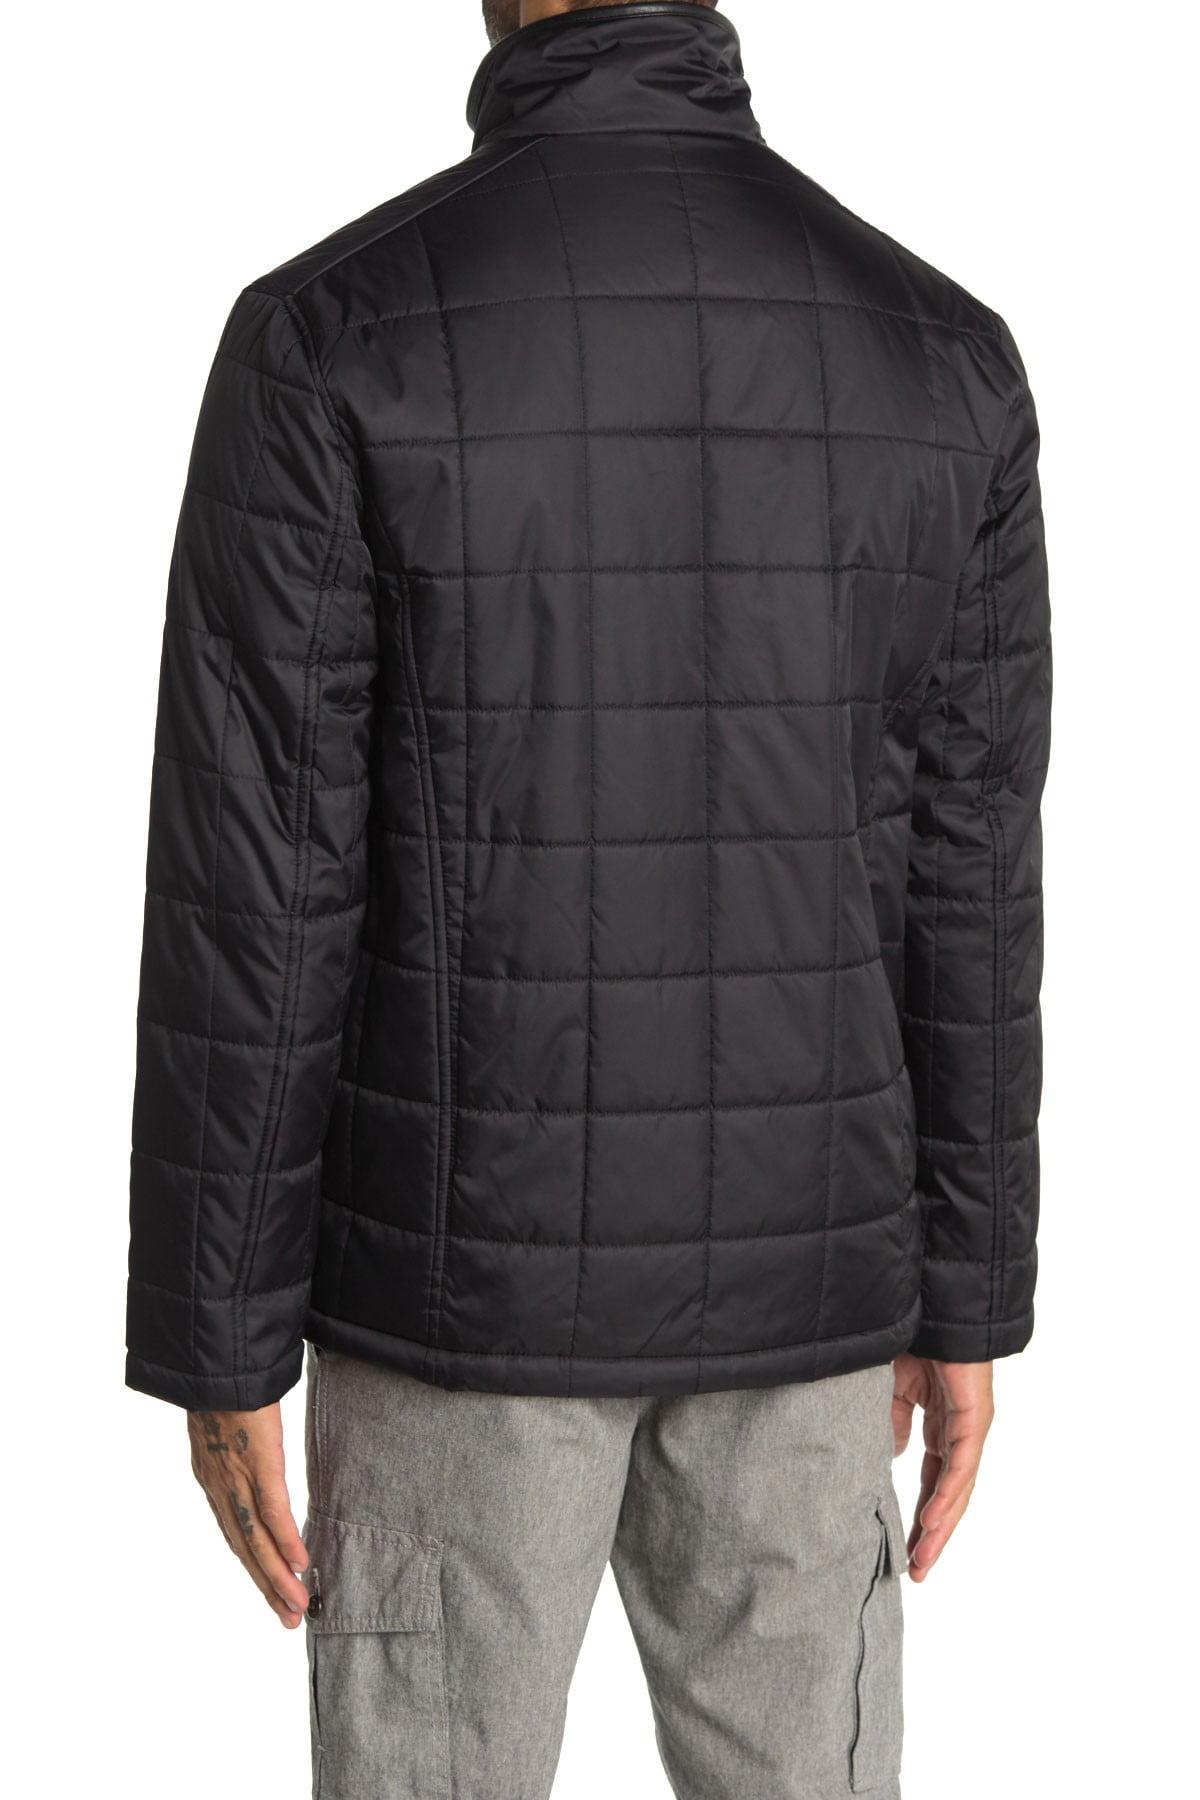 Cole Haan Synthetic Quilted Jacket in Black for Men - Lyst